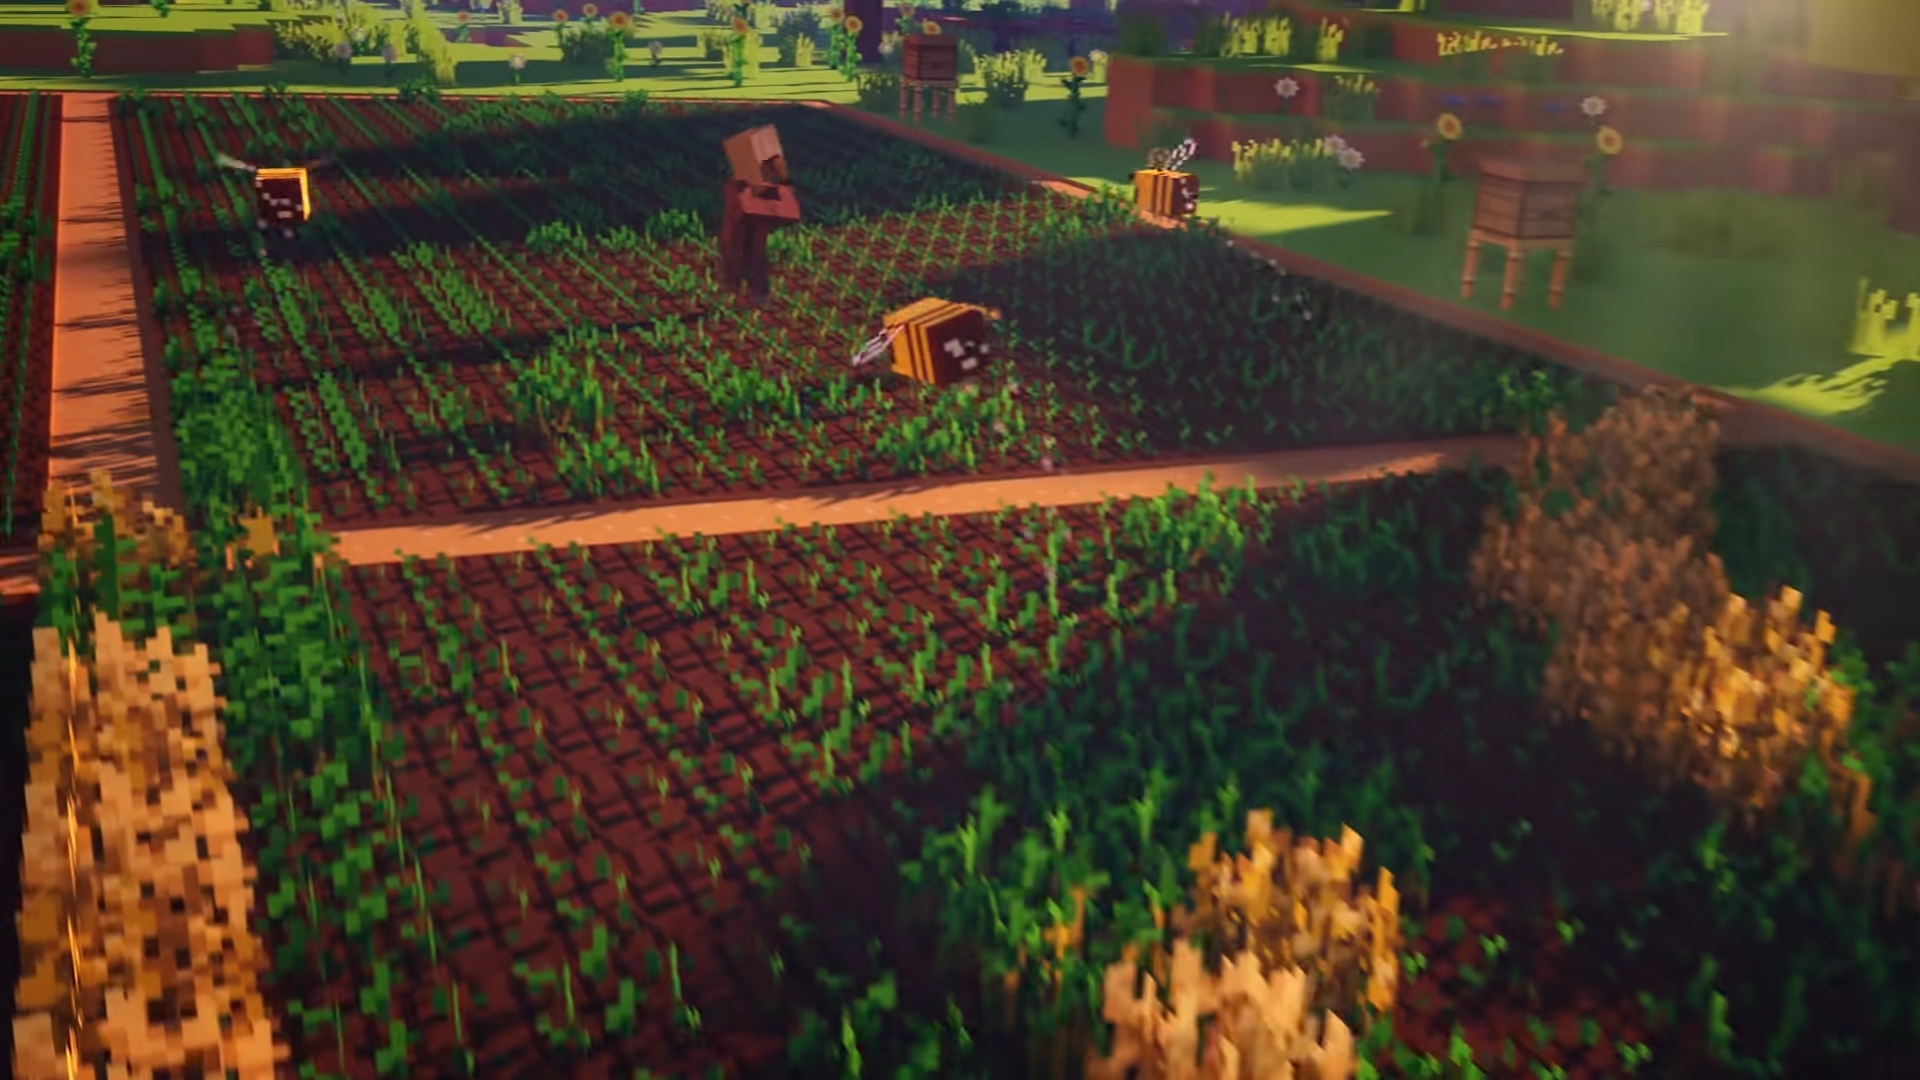 Best farm games - Minecraft. A screenshot shows a stretch of farmland with bees flying over and villagers standing amidst it.